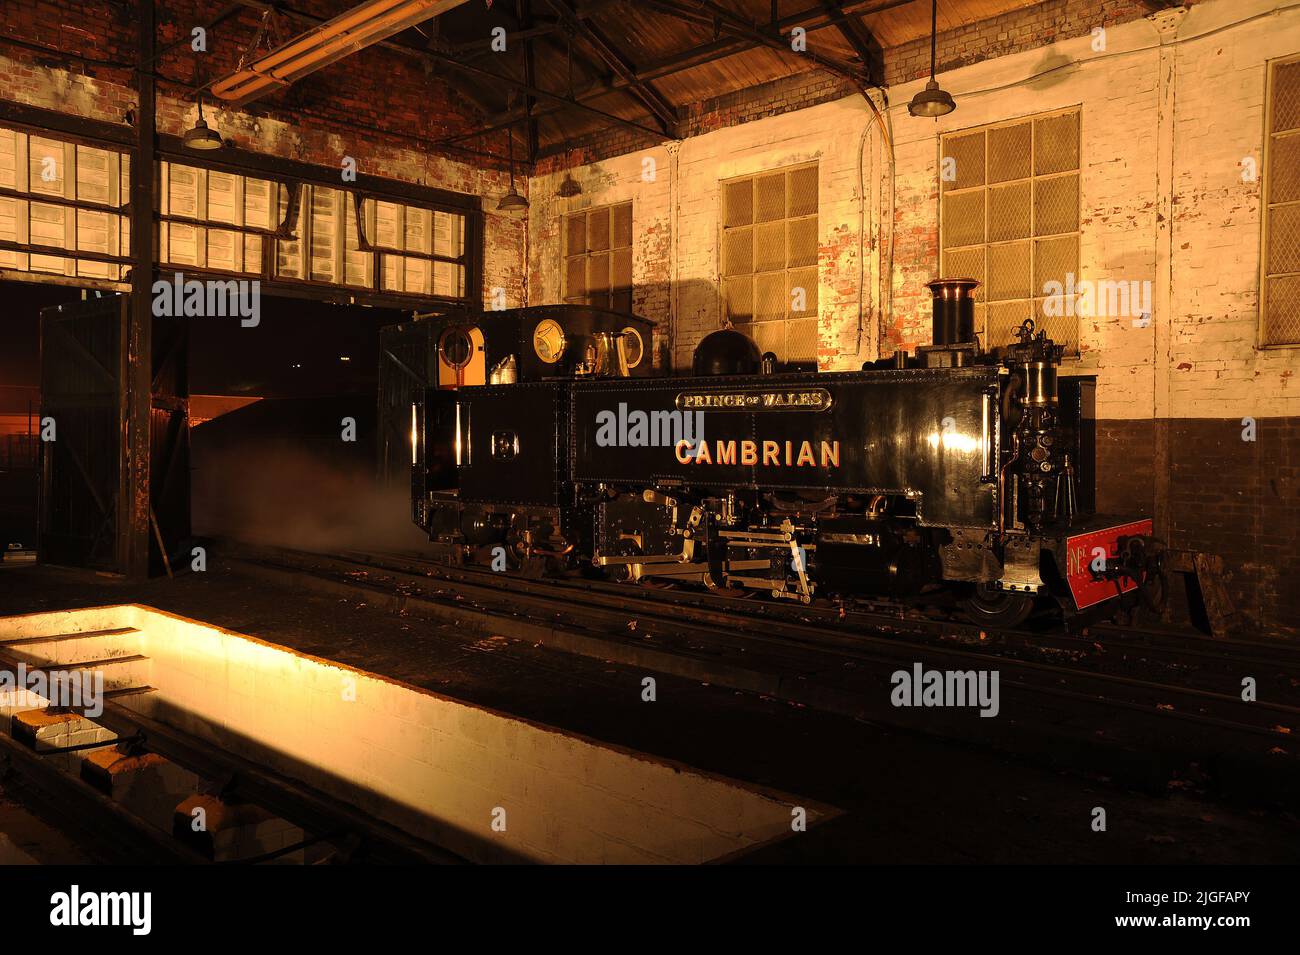 'Prince of Wales' inside the shed at Aberystwyth. Stock Photo